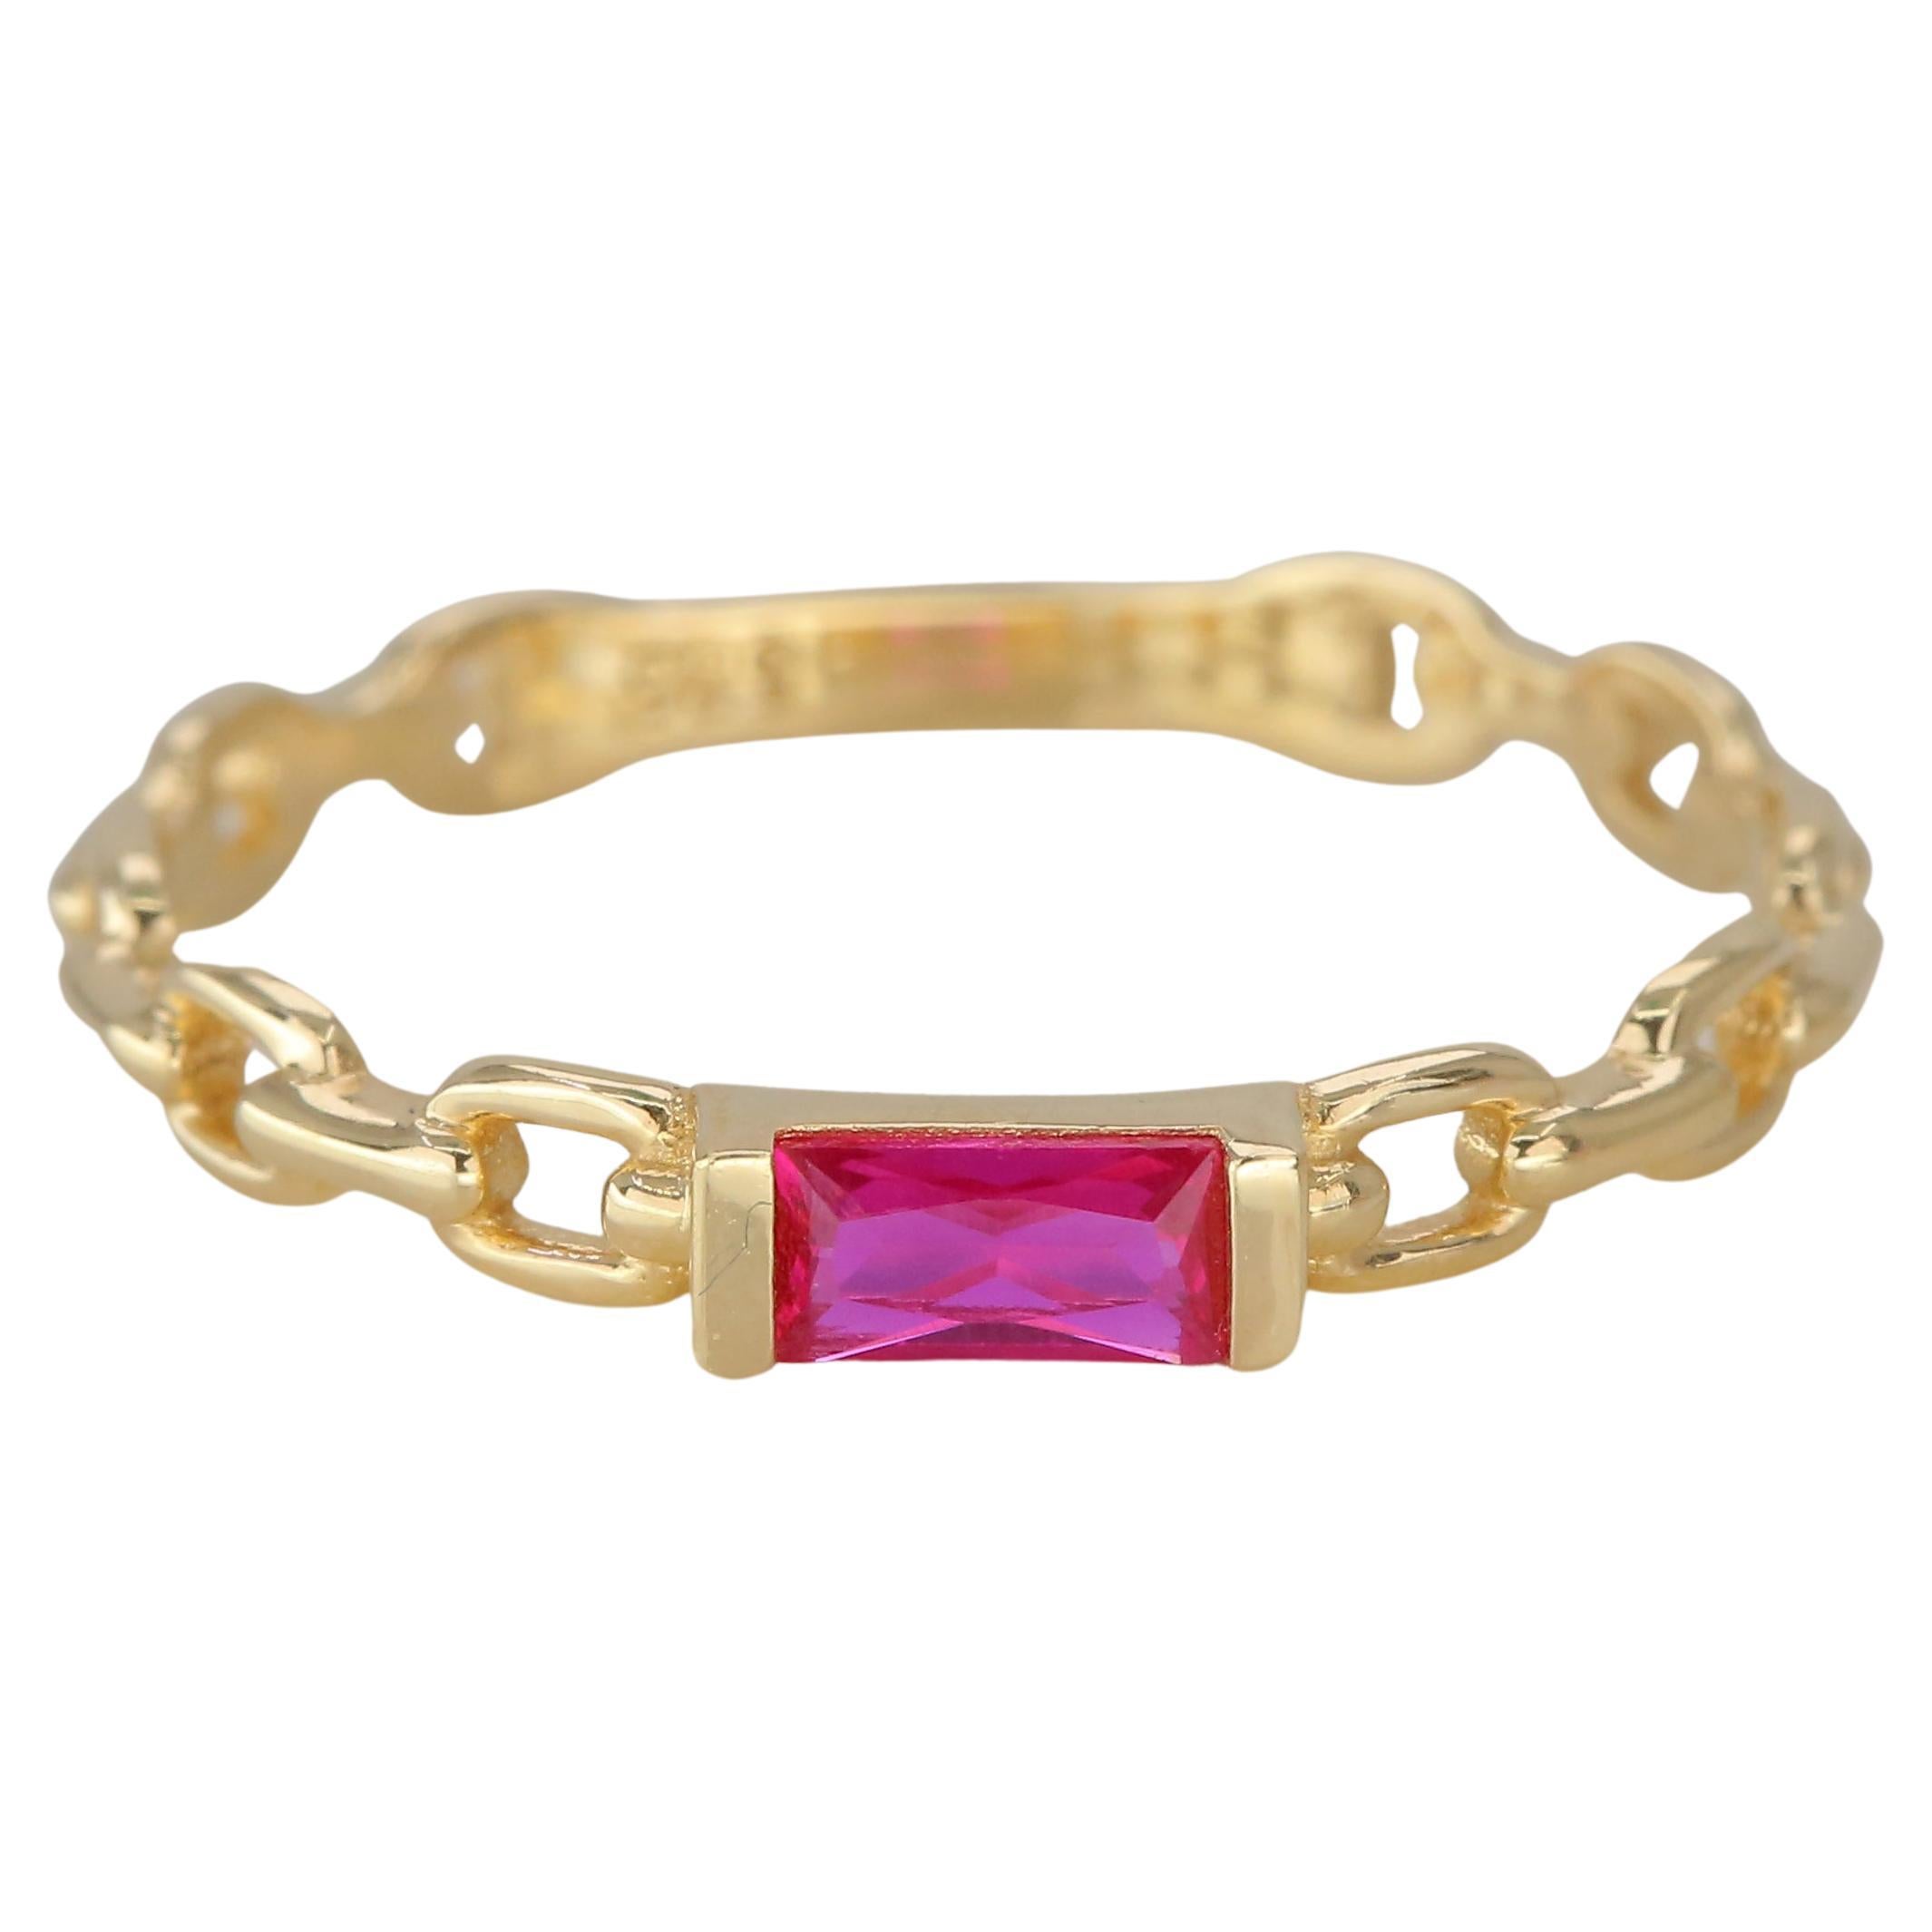 For Sale:  14 K Solid Gold Chain Link Ring -with Pink Quartz, Modern Minimal Ring